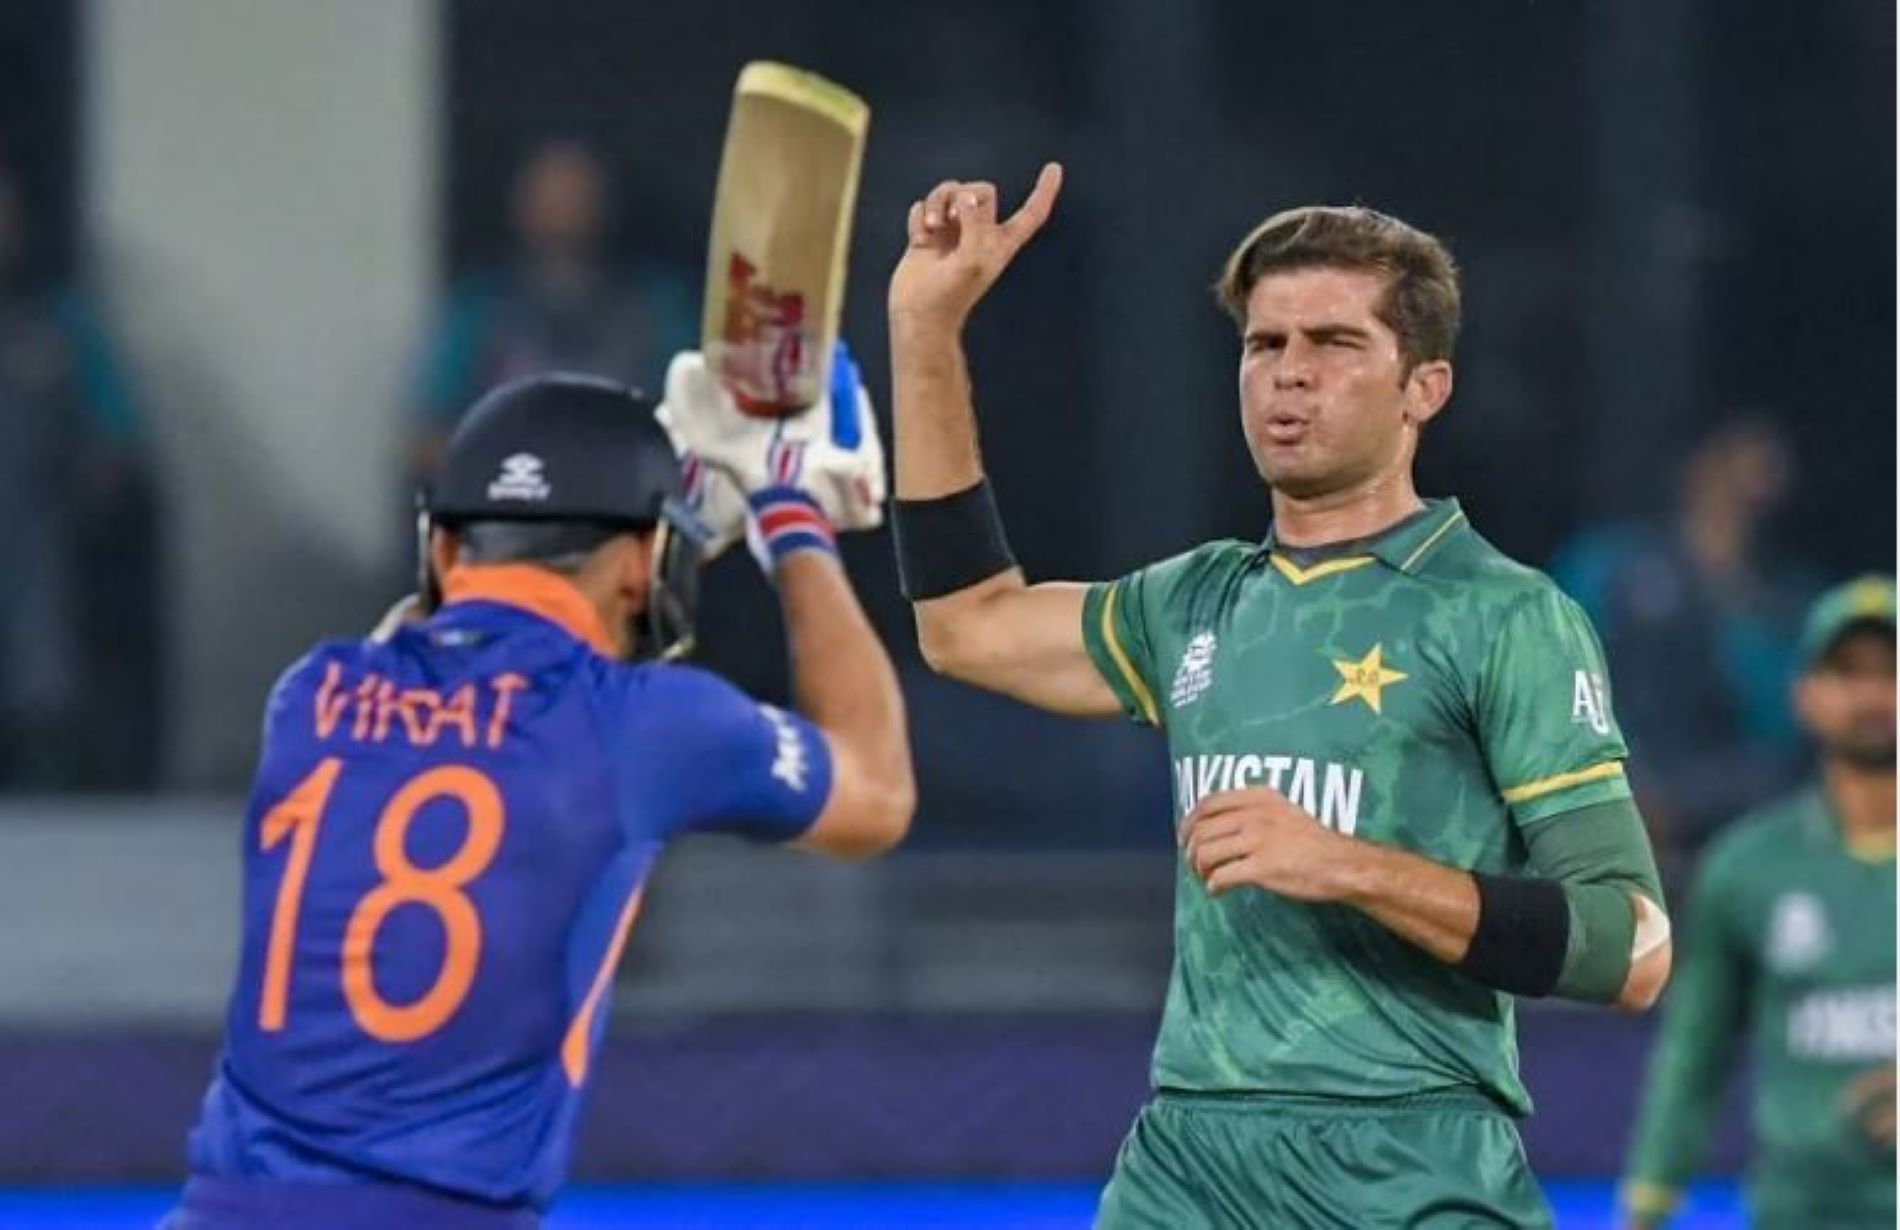 The battle between Virat Kohli and Shaheen Afridi could dictate the outcome of the Ind-Pak contest